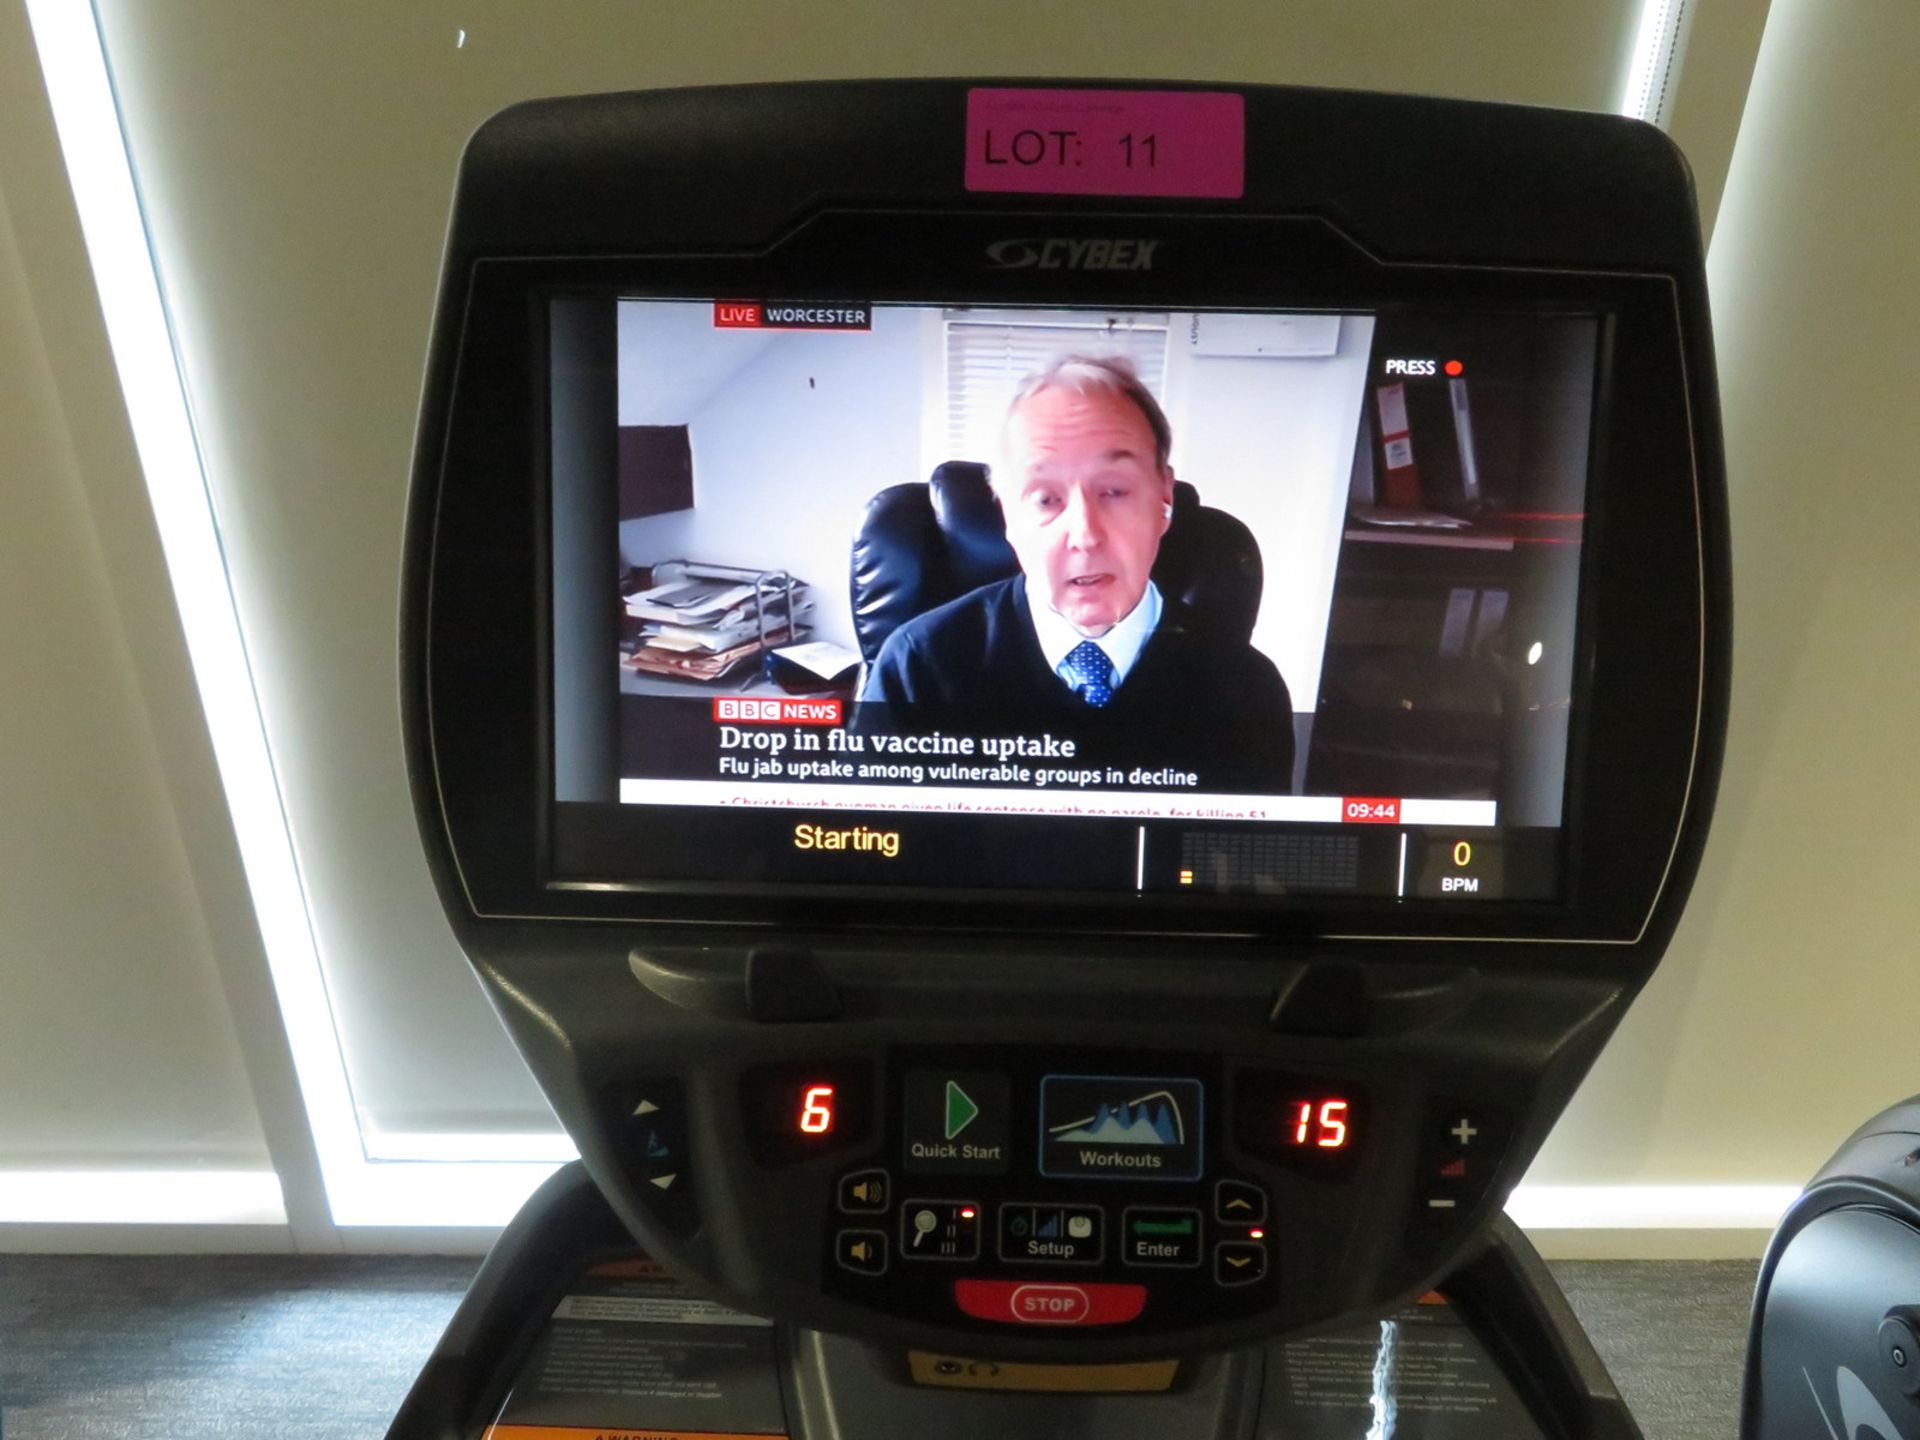 Cybex Arc Trainer Model: 627AT. Working Condition With TV Display Monitor. - Image 6 of 9